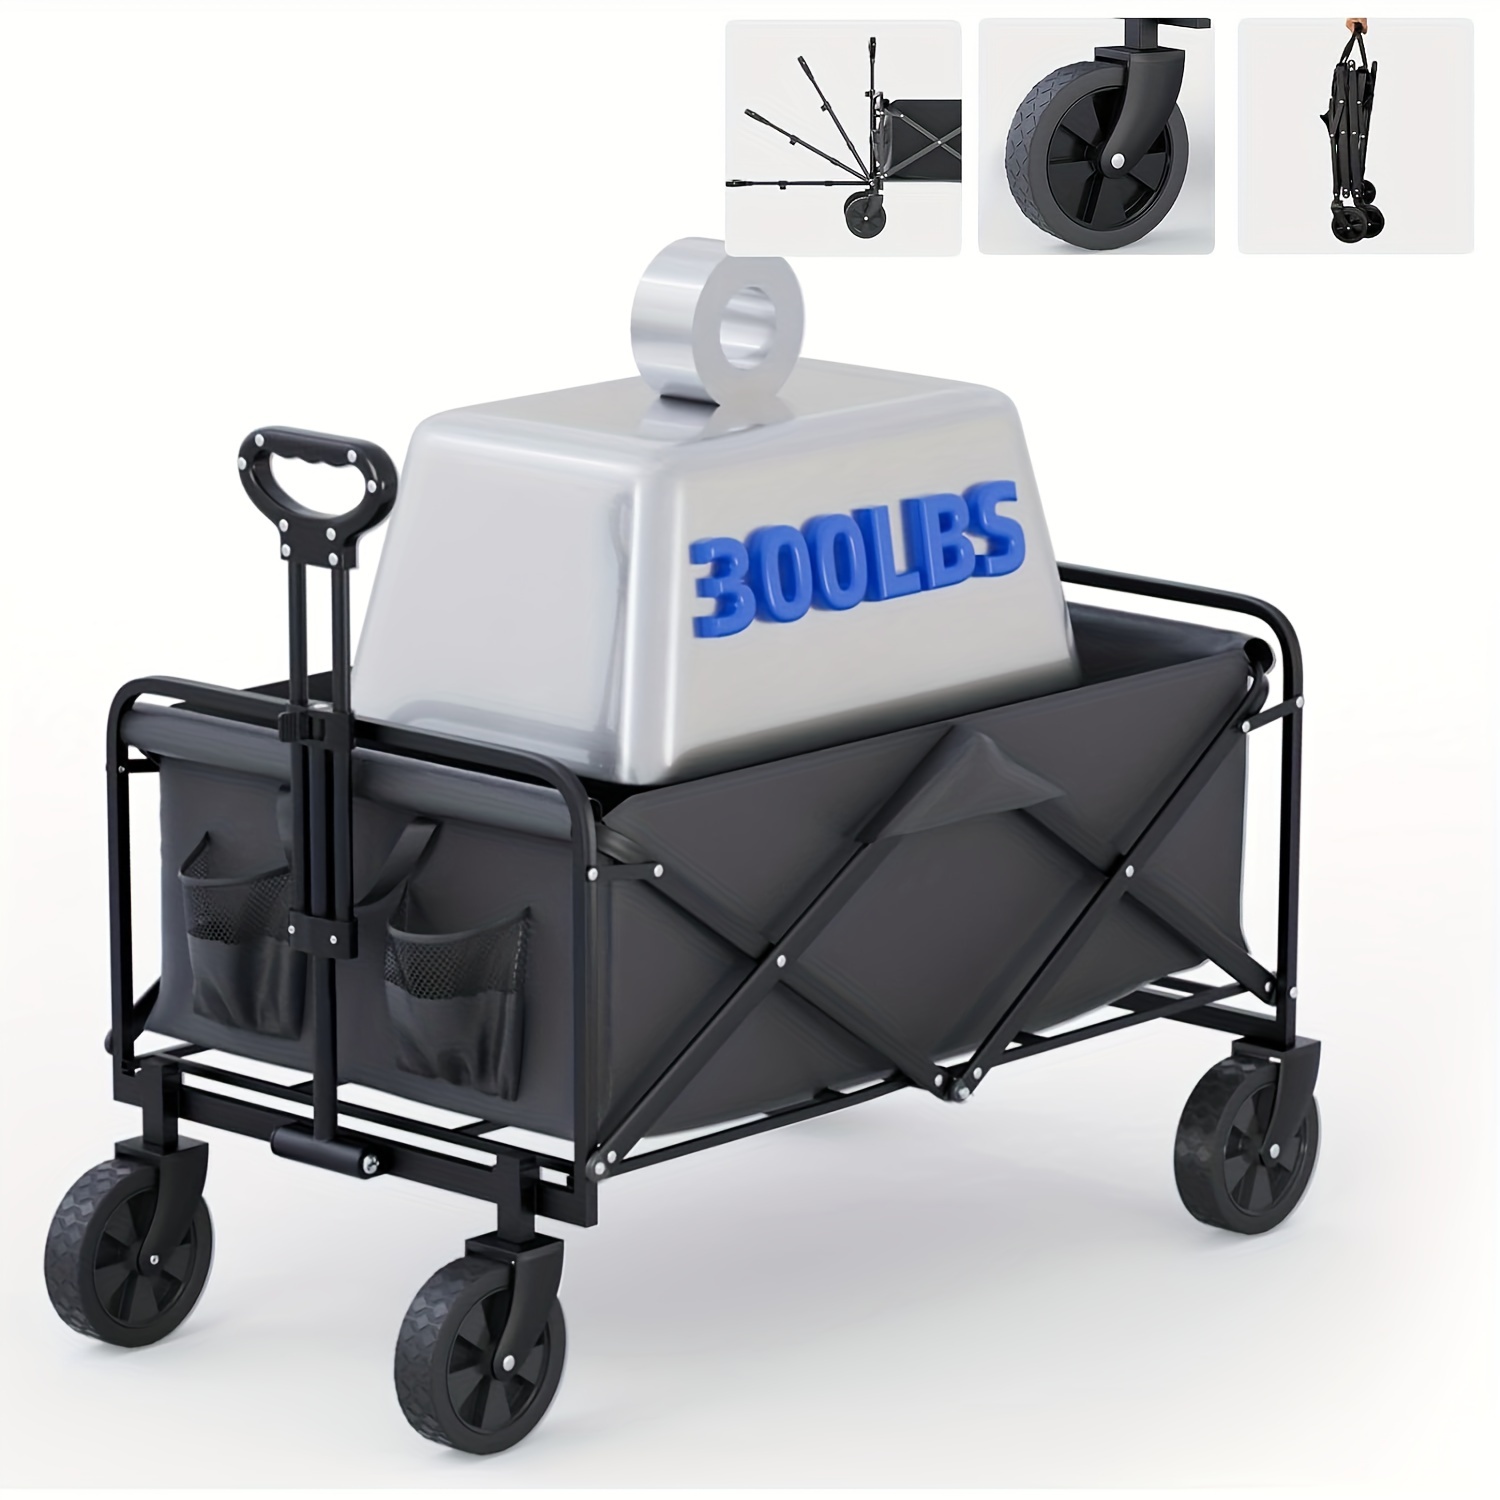 Collapsible Foldable Wagon Cart With All Terrain Solid Wheels